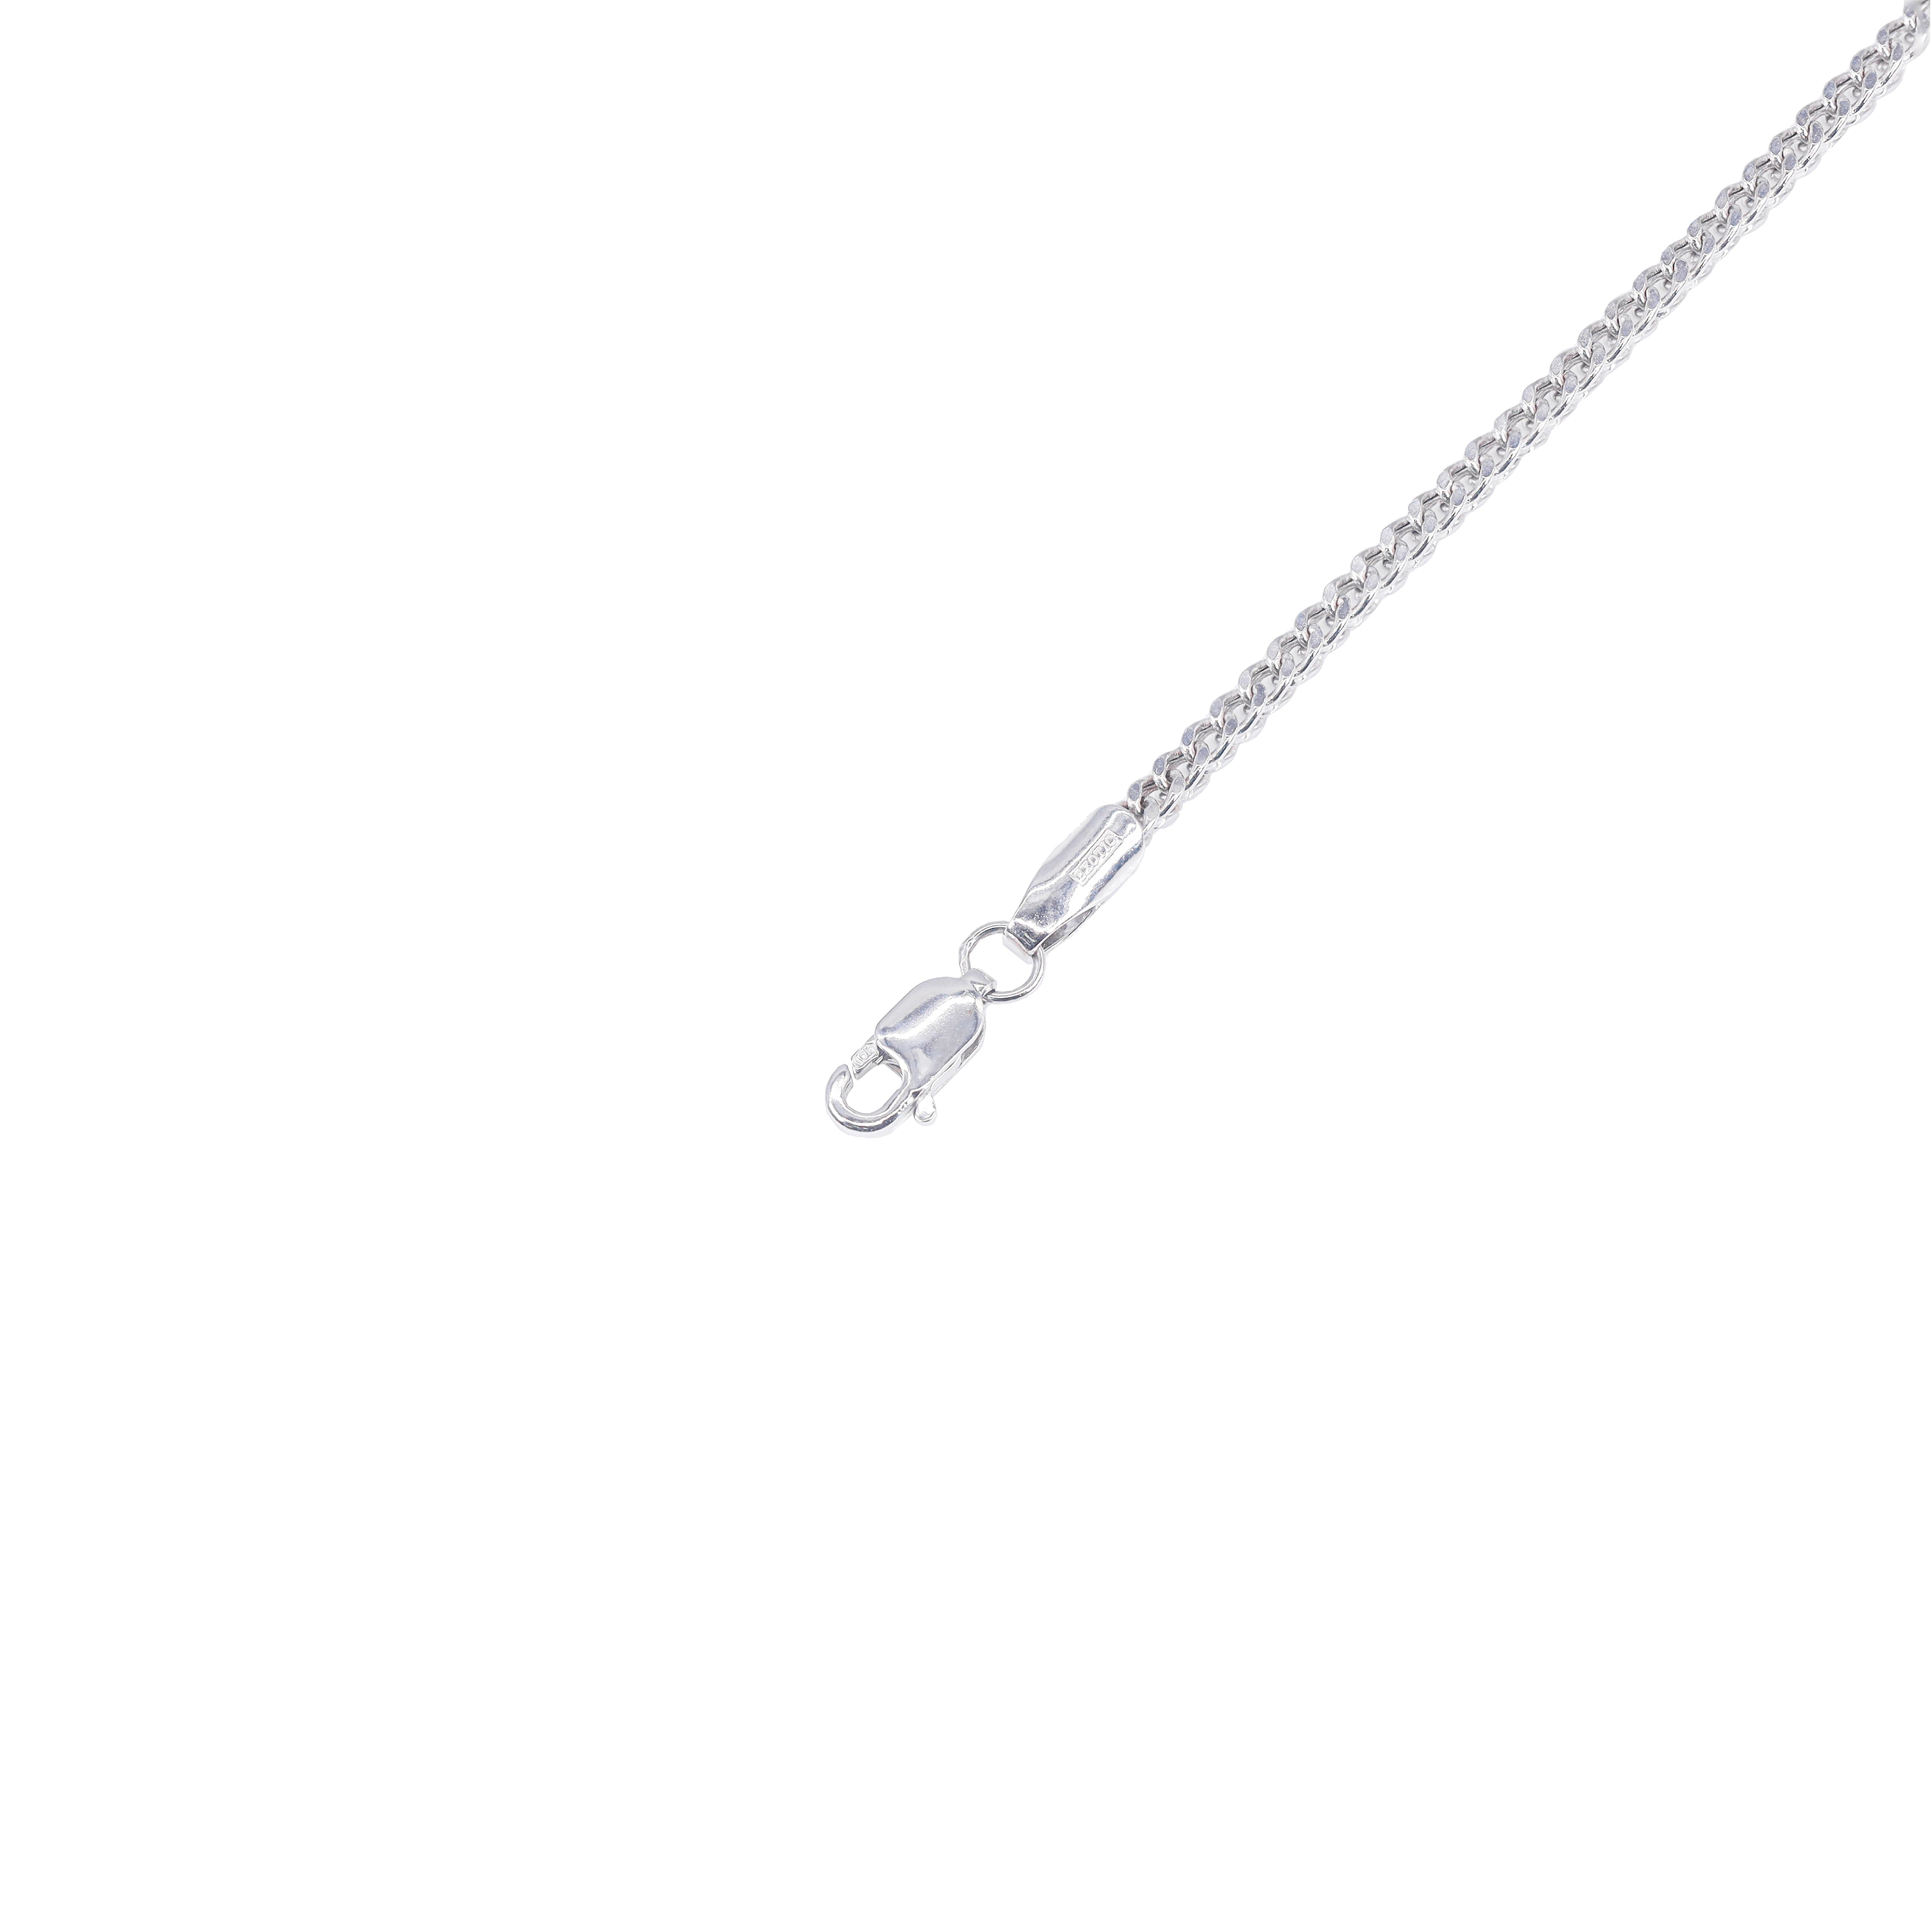 10KT Solid Square Franco White Gold Chain